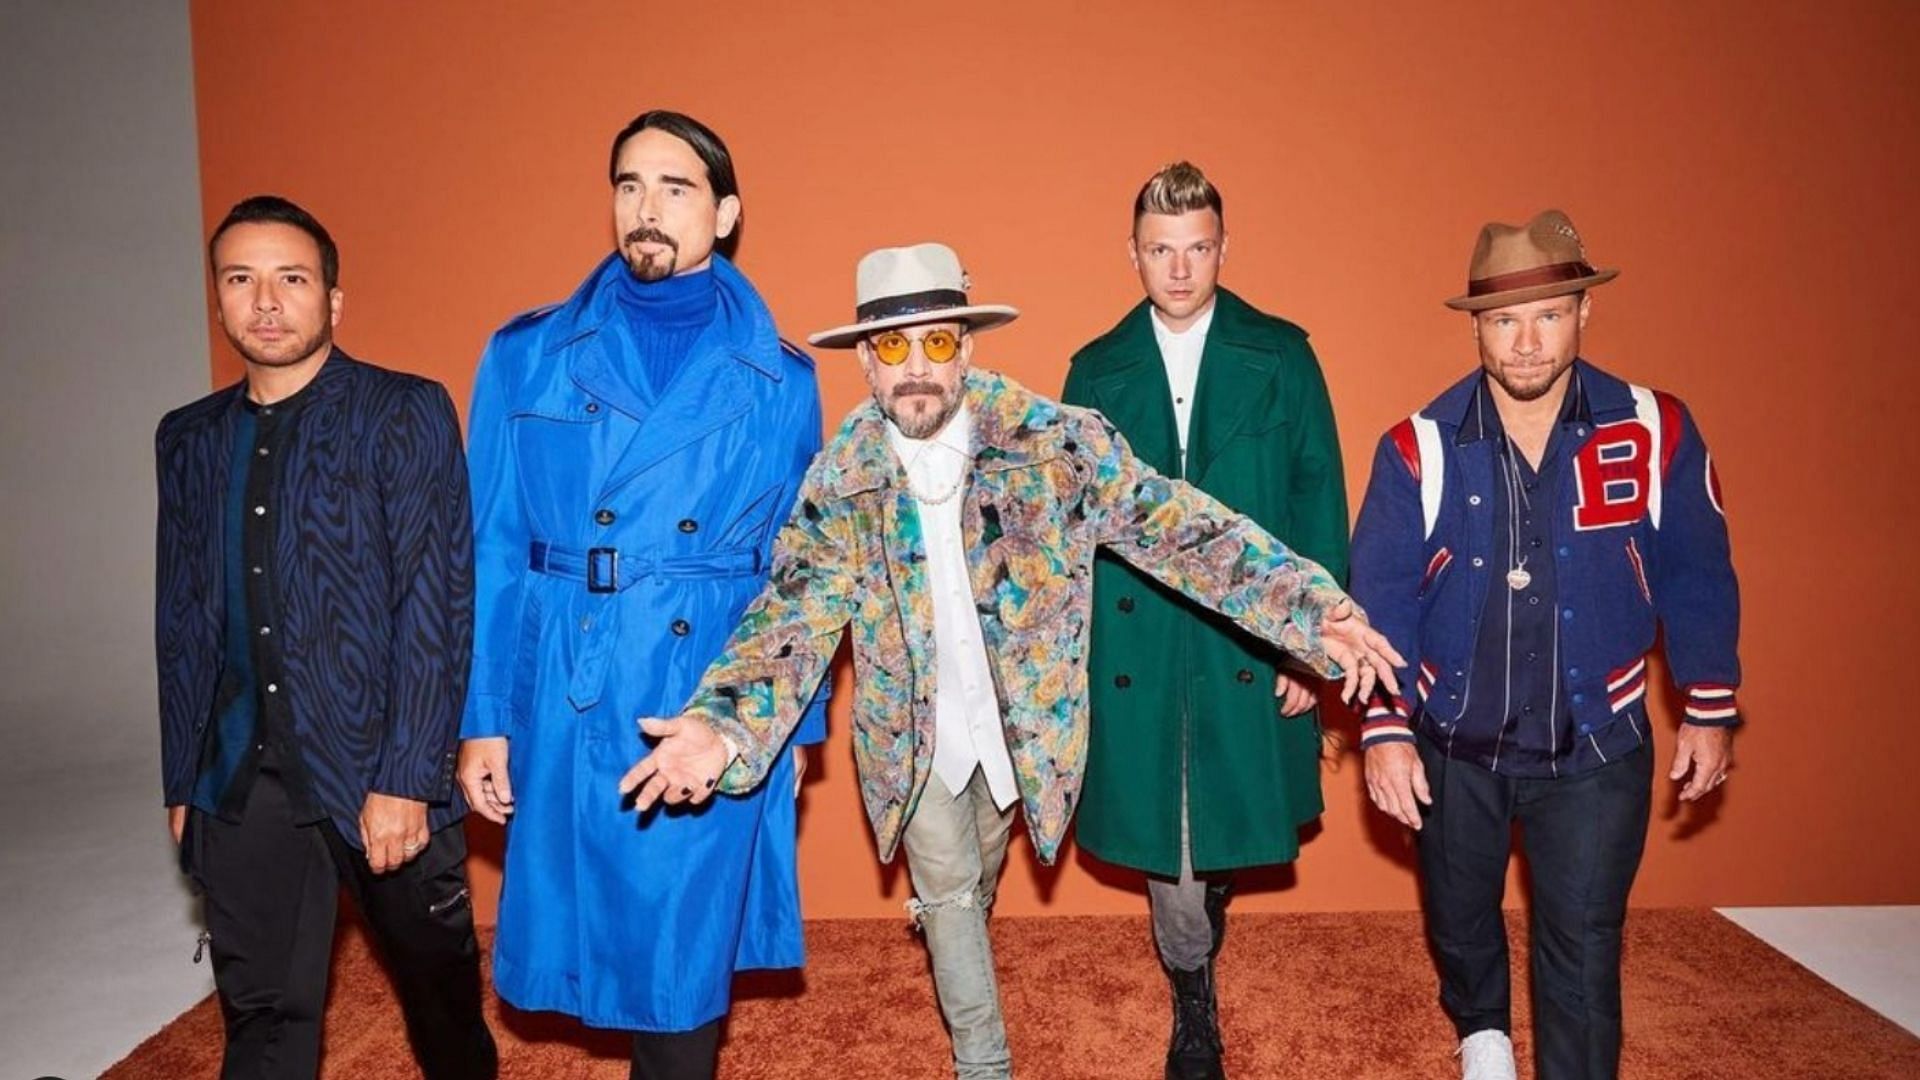 American boy band Backstreet Boys have announced extended dates for their upcoming DNA World Tour 2022. (Image via Instagram / @backstreetboys)